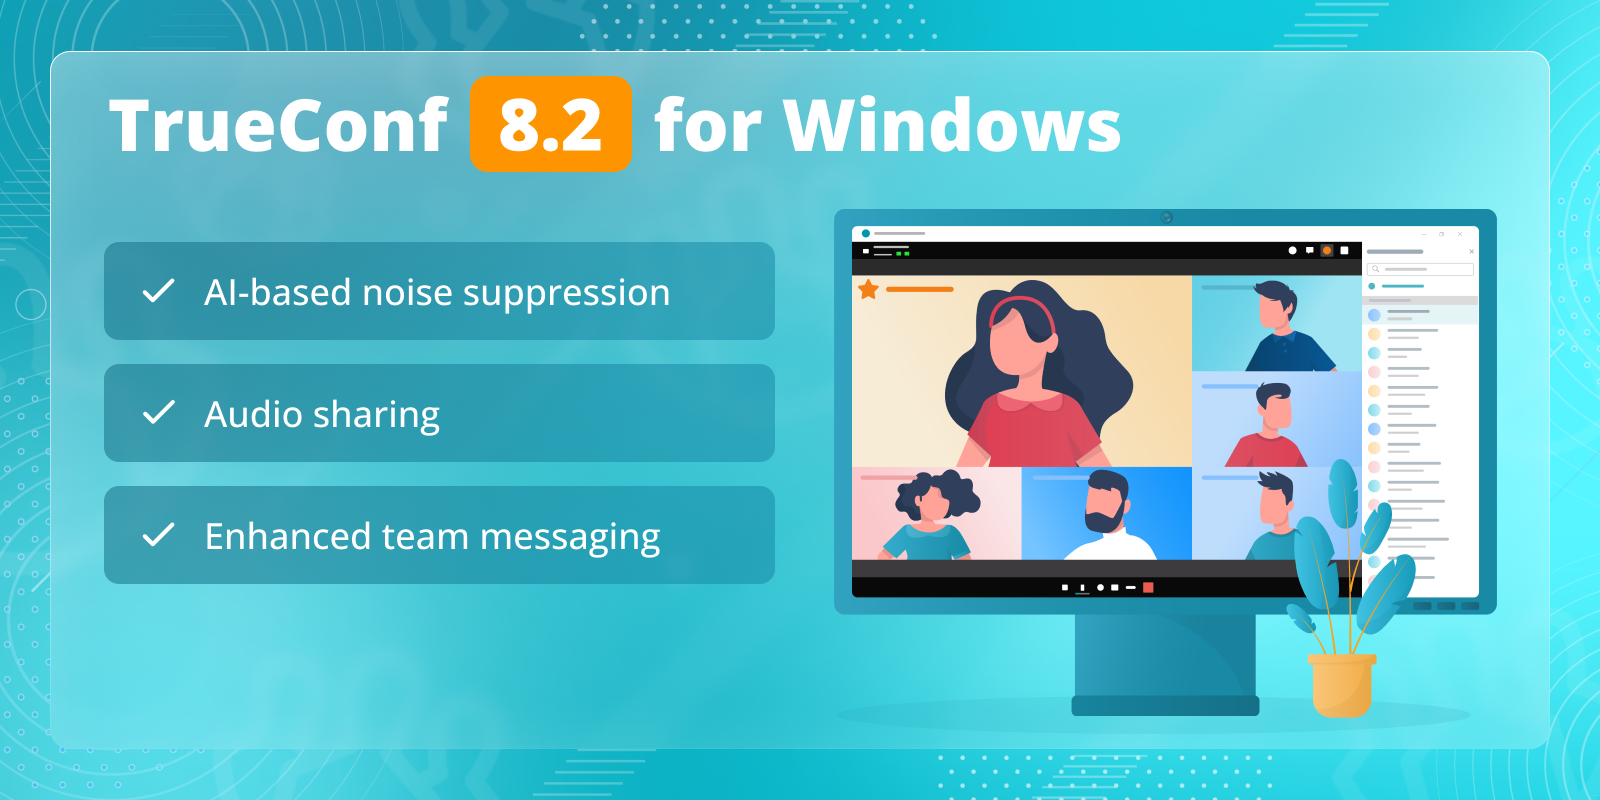 TrueConf 8.2 for Windows: AI-based noise suppression, enhanced team messaging, and audio sharing 1